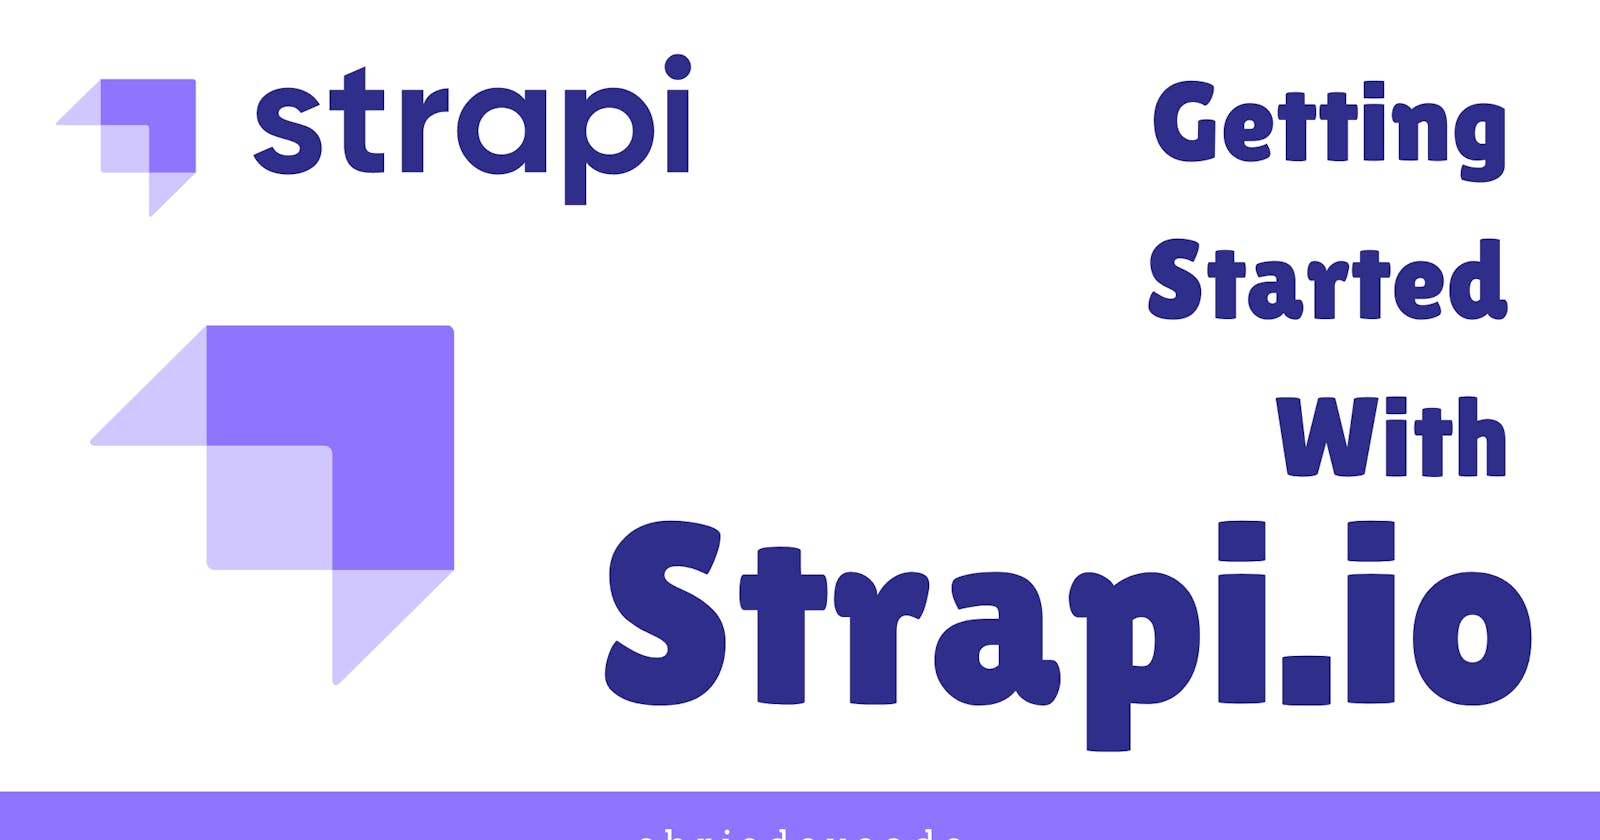 Getting Started With strapi